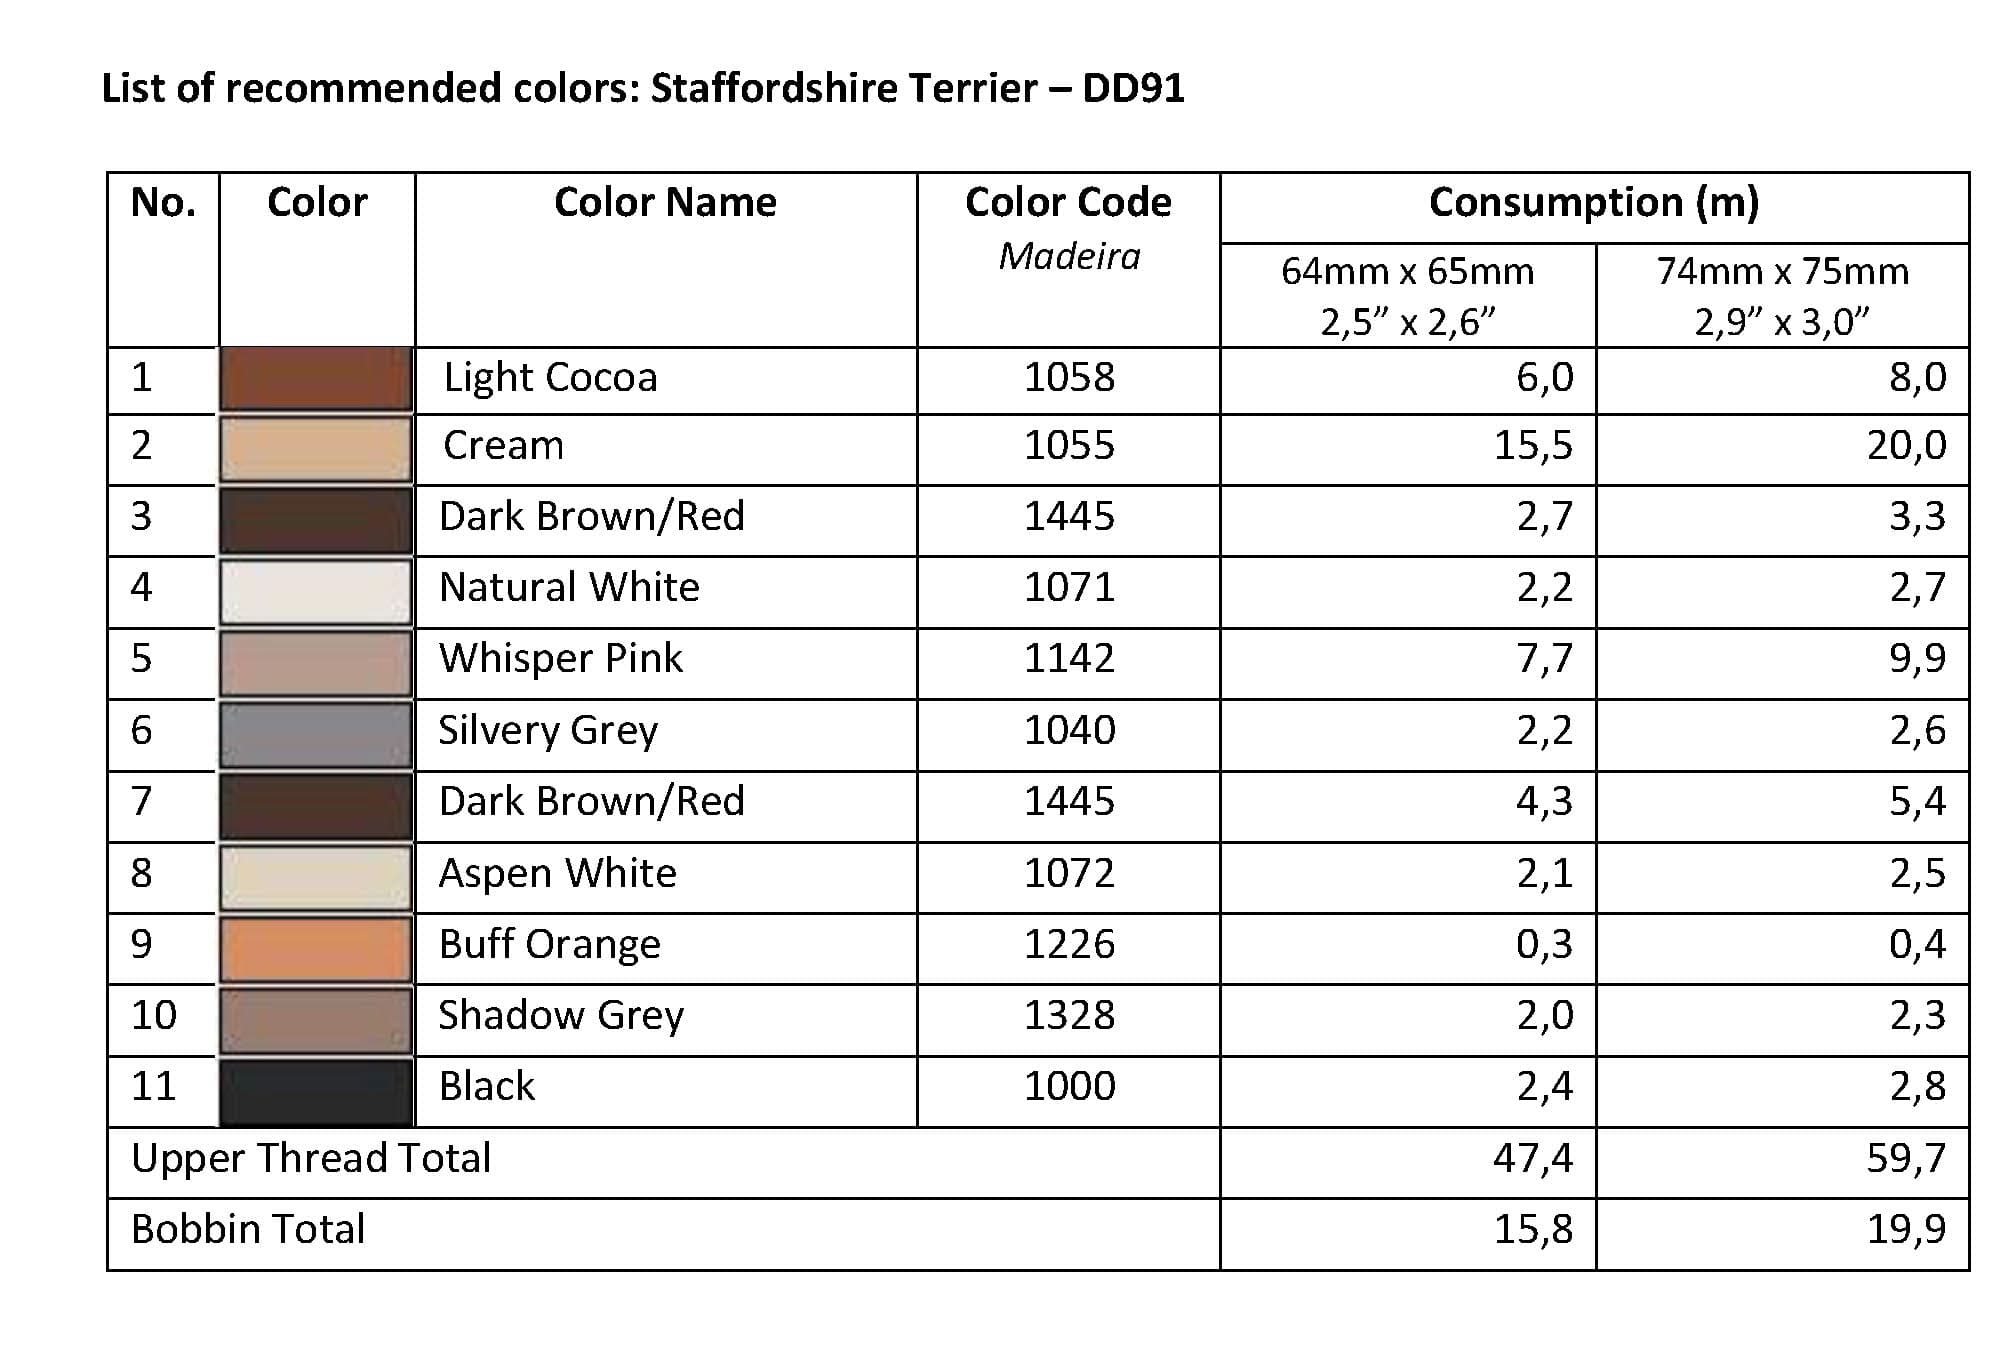 List of Recommended Colors - Staffordshire Terrier DD91